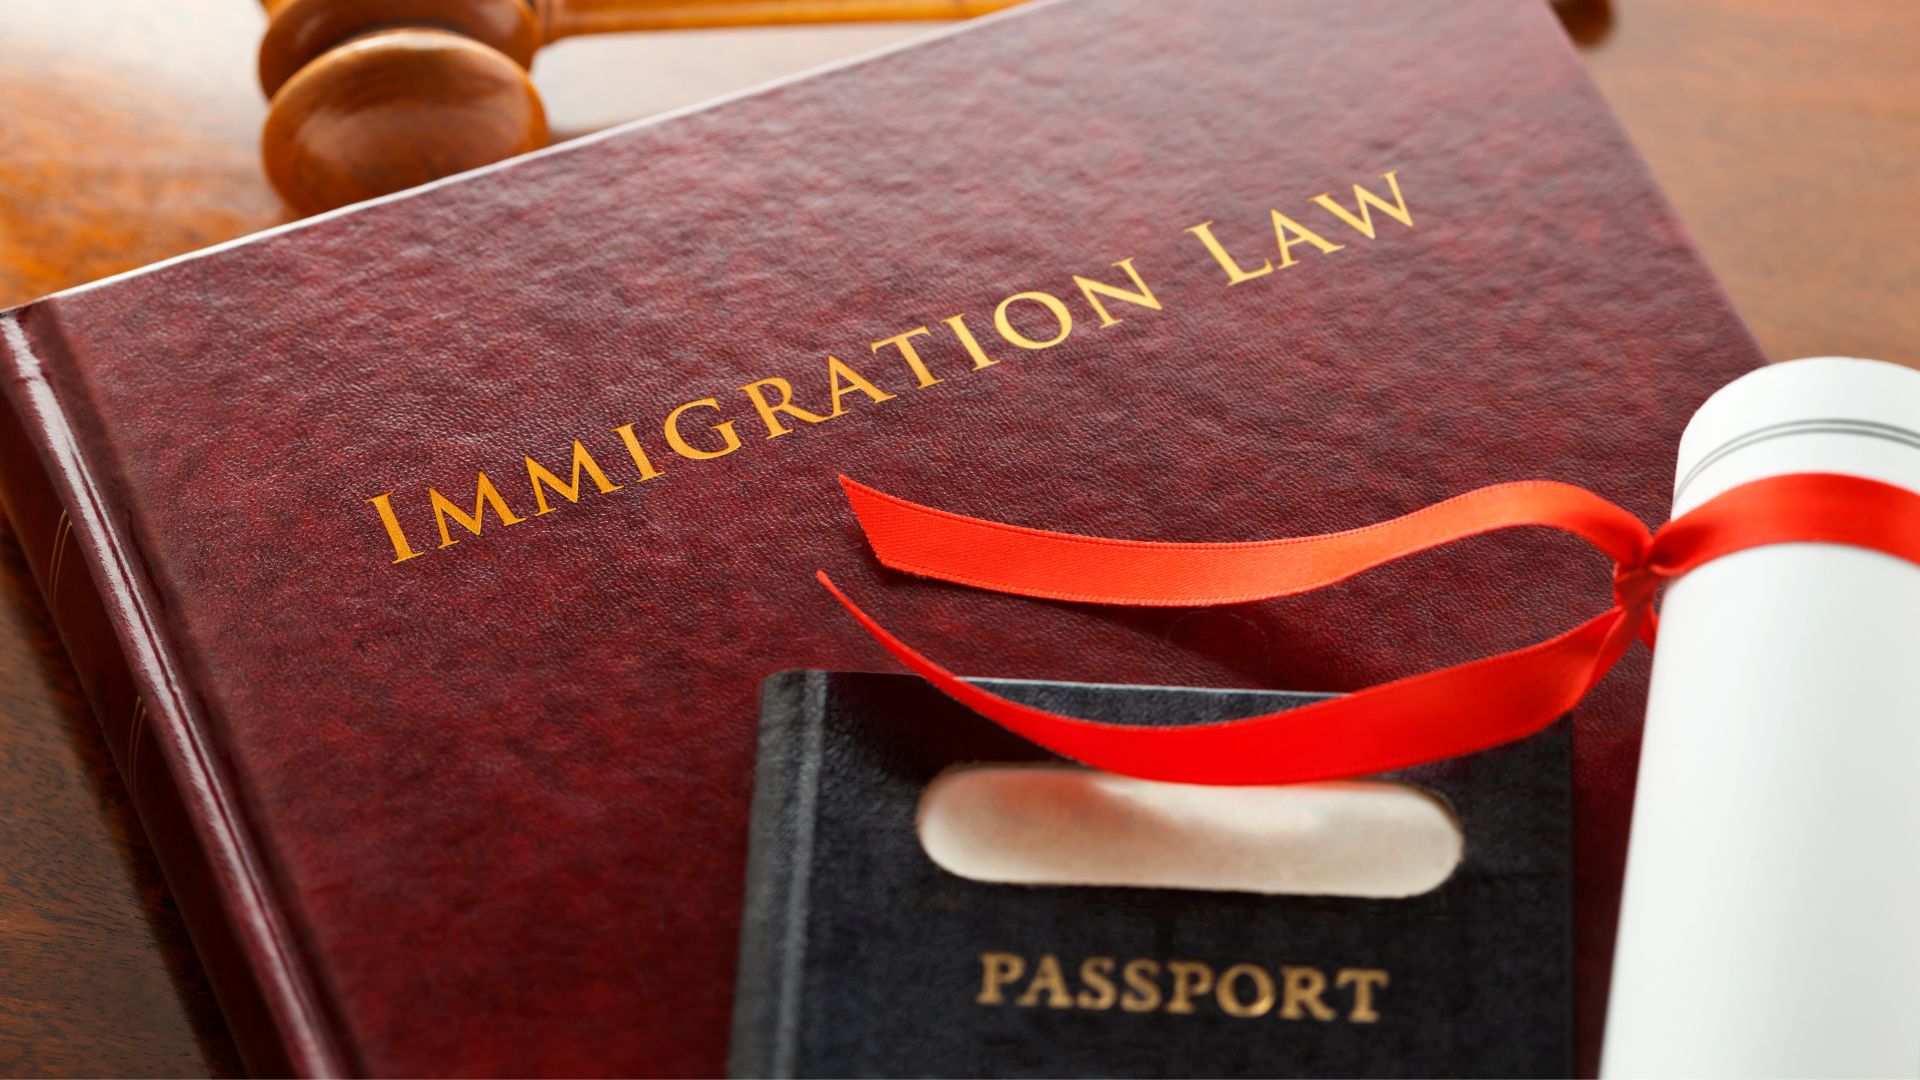 immigration law book